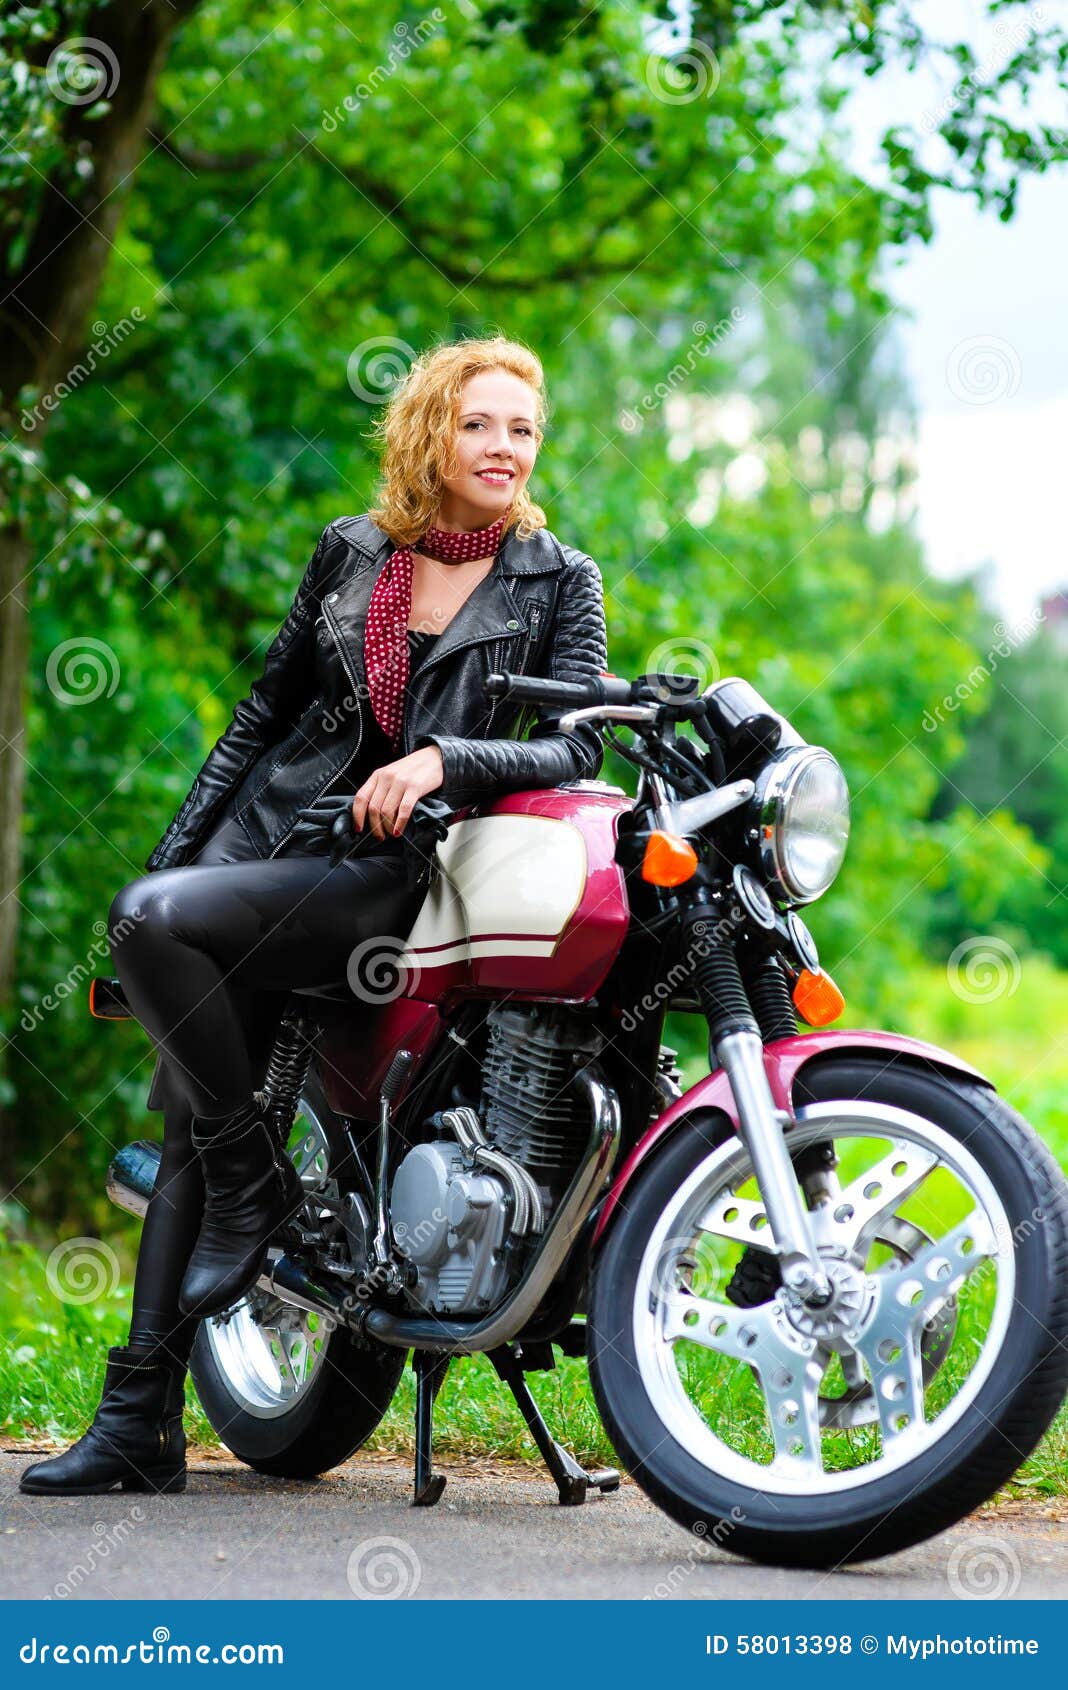 Biker Girl In Leather Jacket On A Motorcycle Stock Photo ...